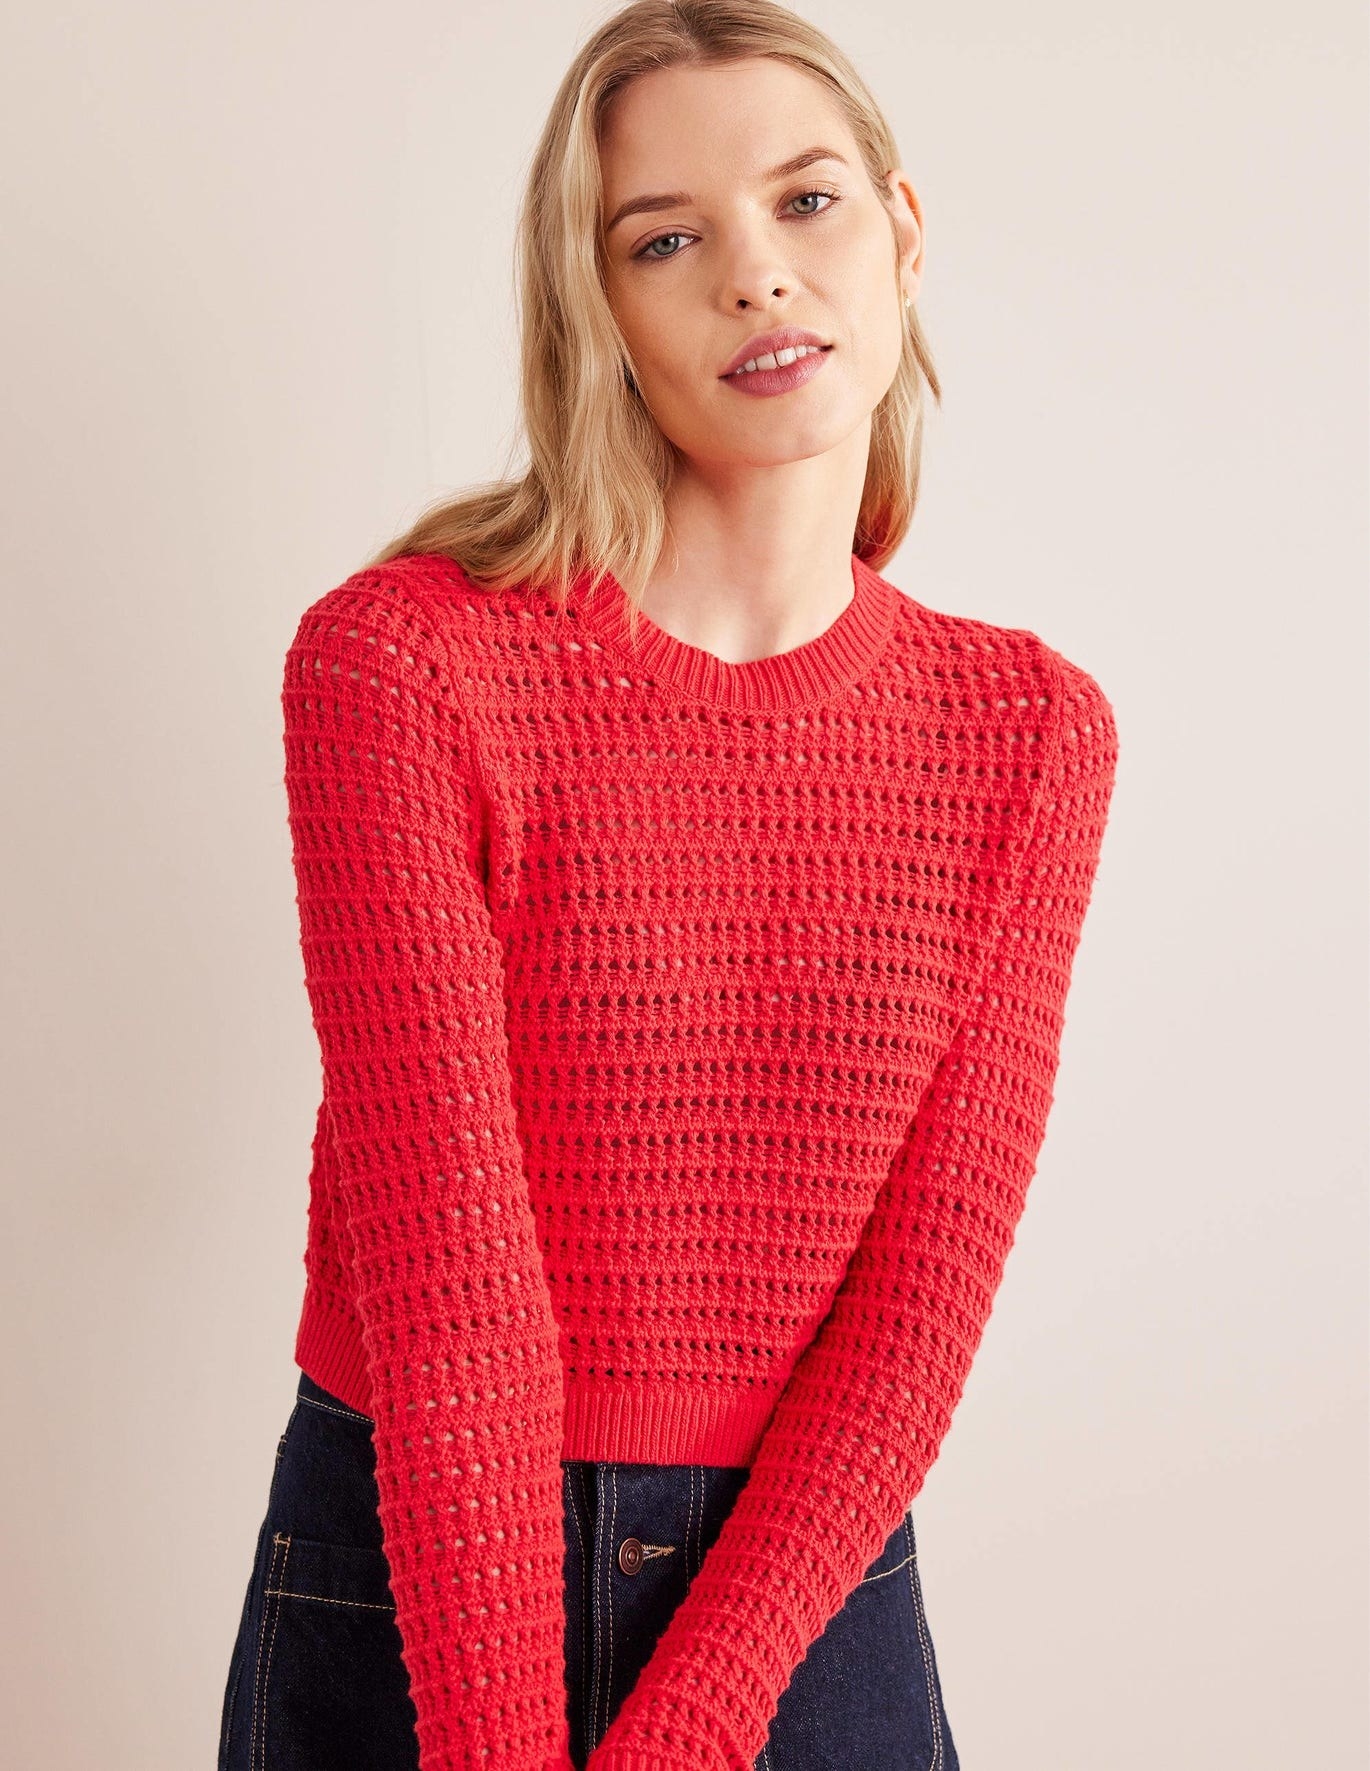 model in long sleeve bright red cropped crochet pullover